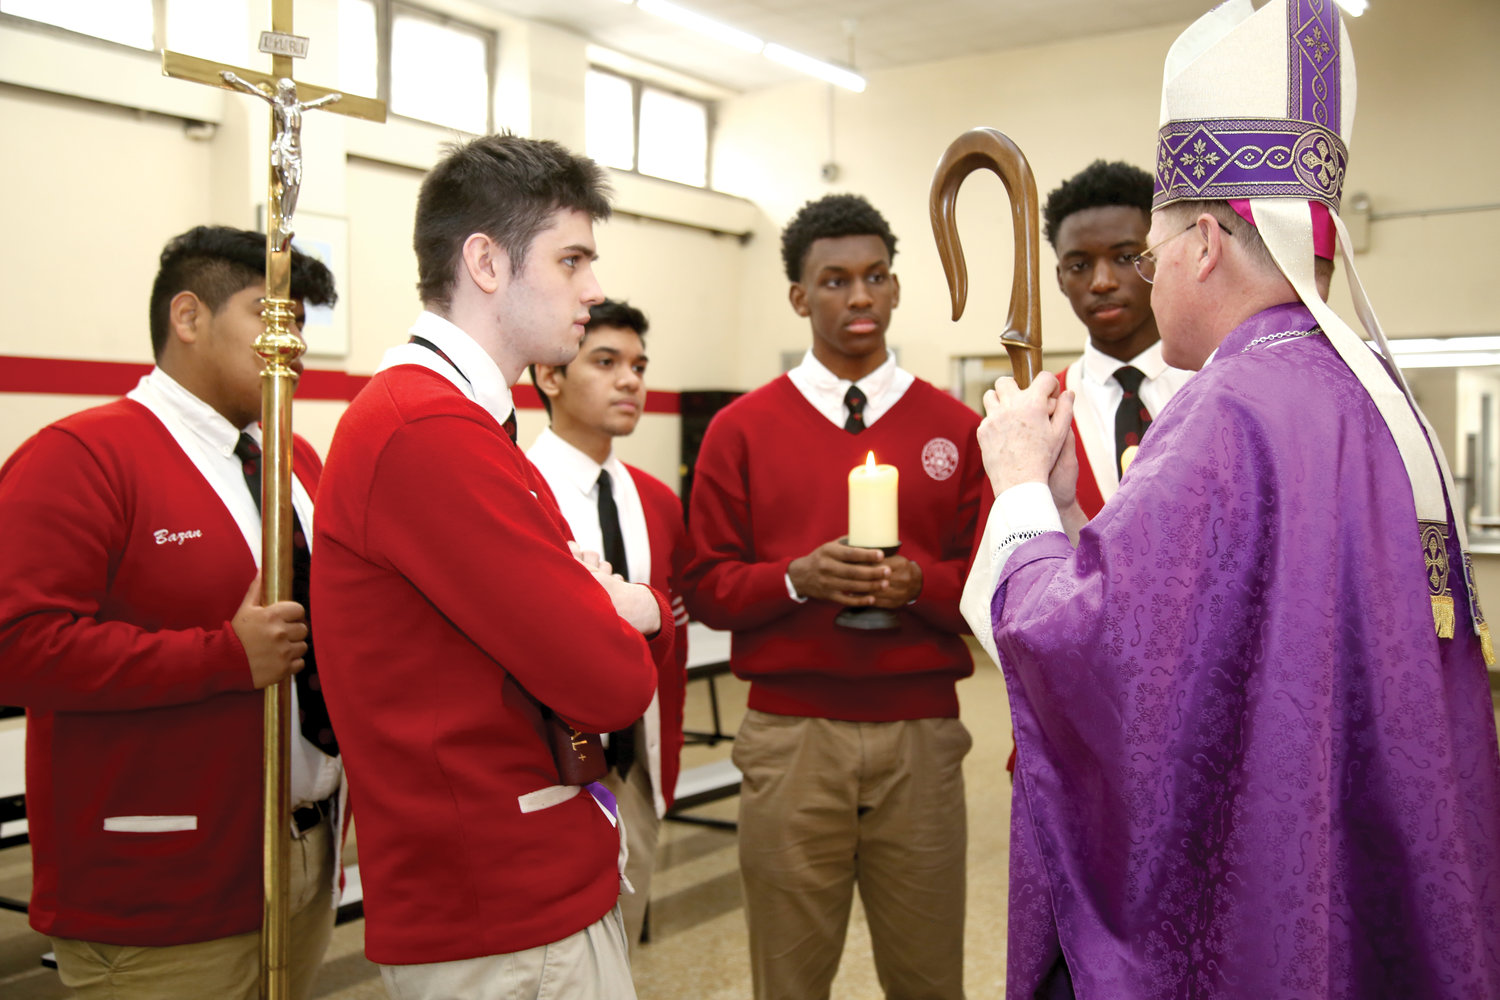 The bishop meets with members of La Salle’s Class of 2020 who served at the altar during the Mass. From left, they are Brian Bazan, Daniel Betancourt, Dylan Almeida, Theo Noble and Amadou Kouyate.